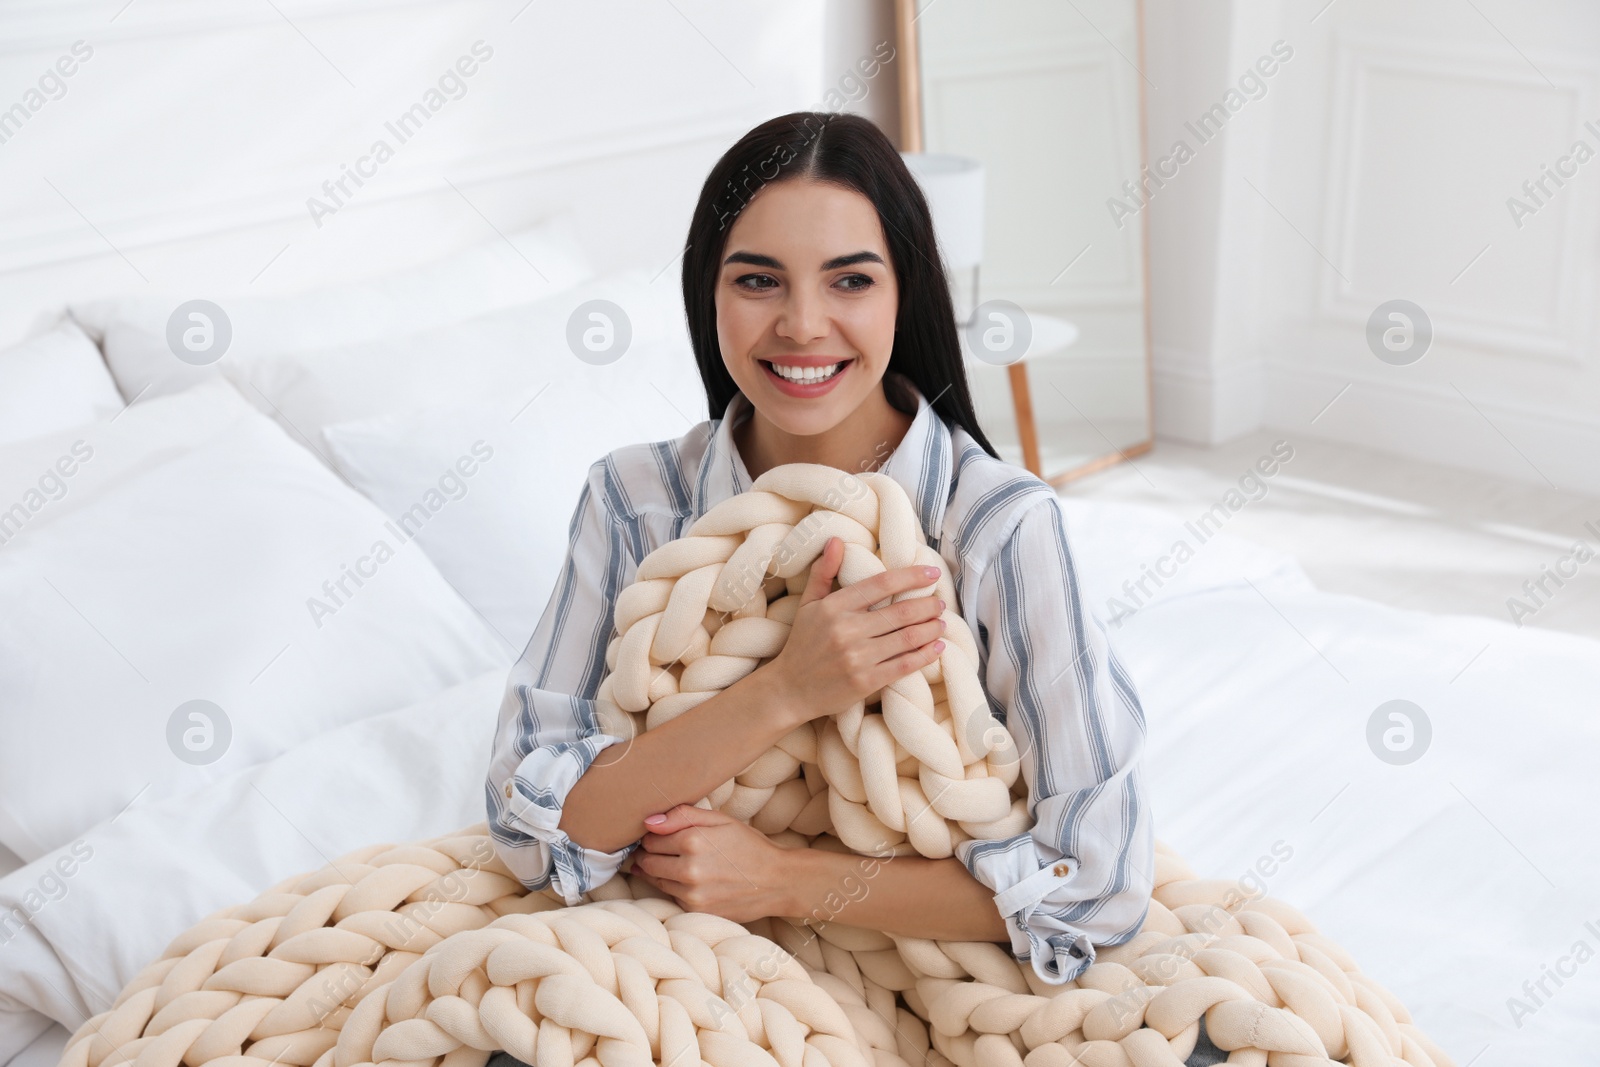 Photo of Young woman with chunky knit blanket on bed at home